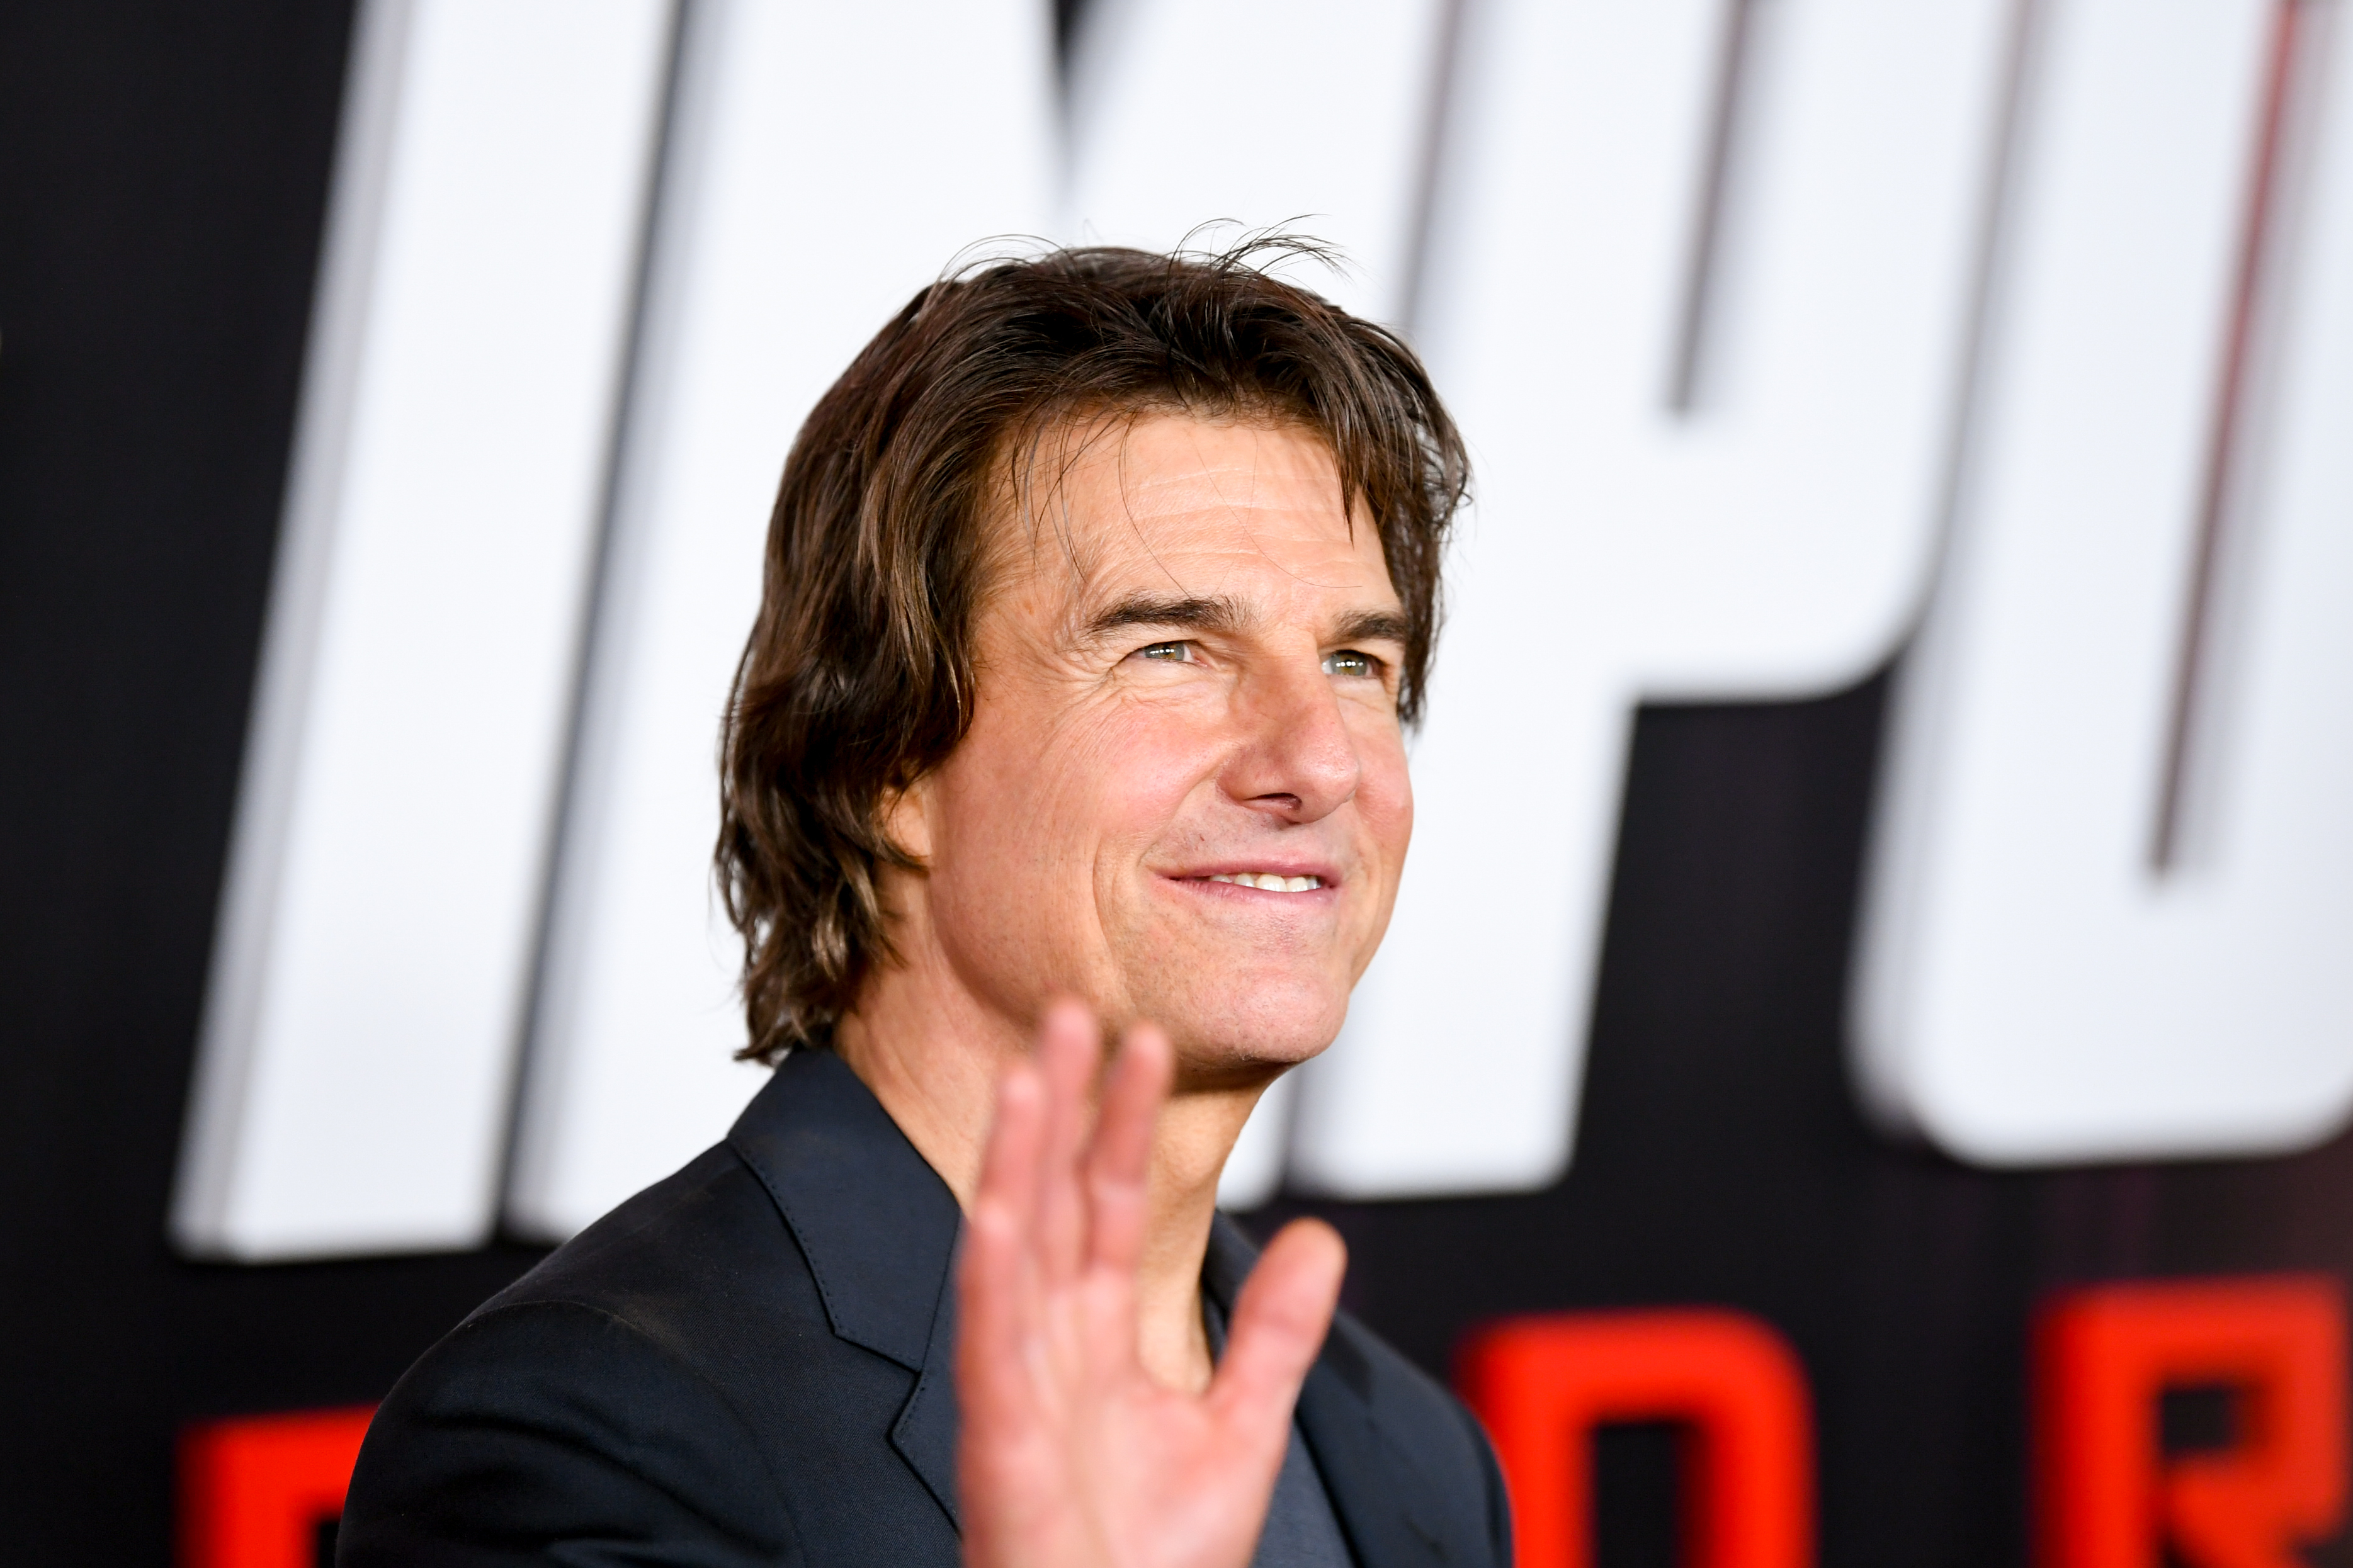 Tom Cruise waves while posing at a red carpet event